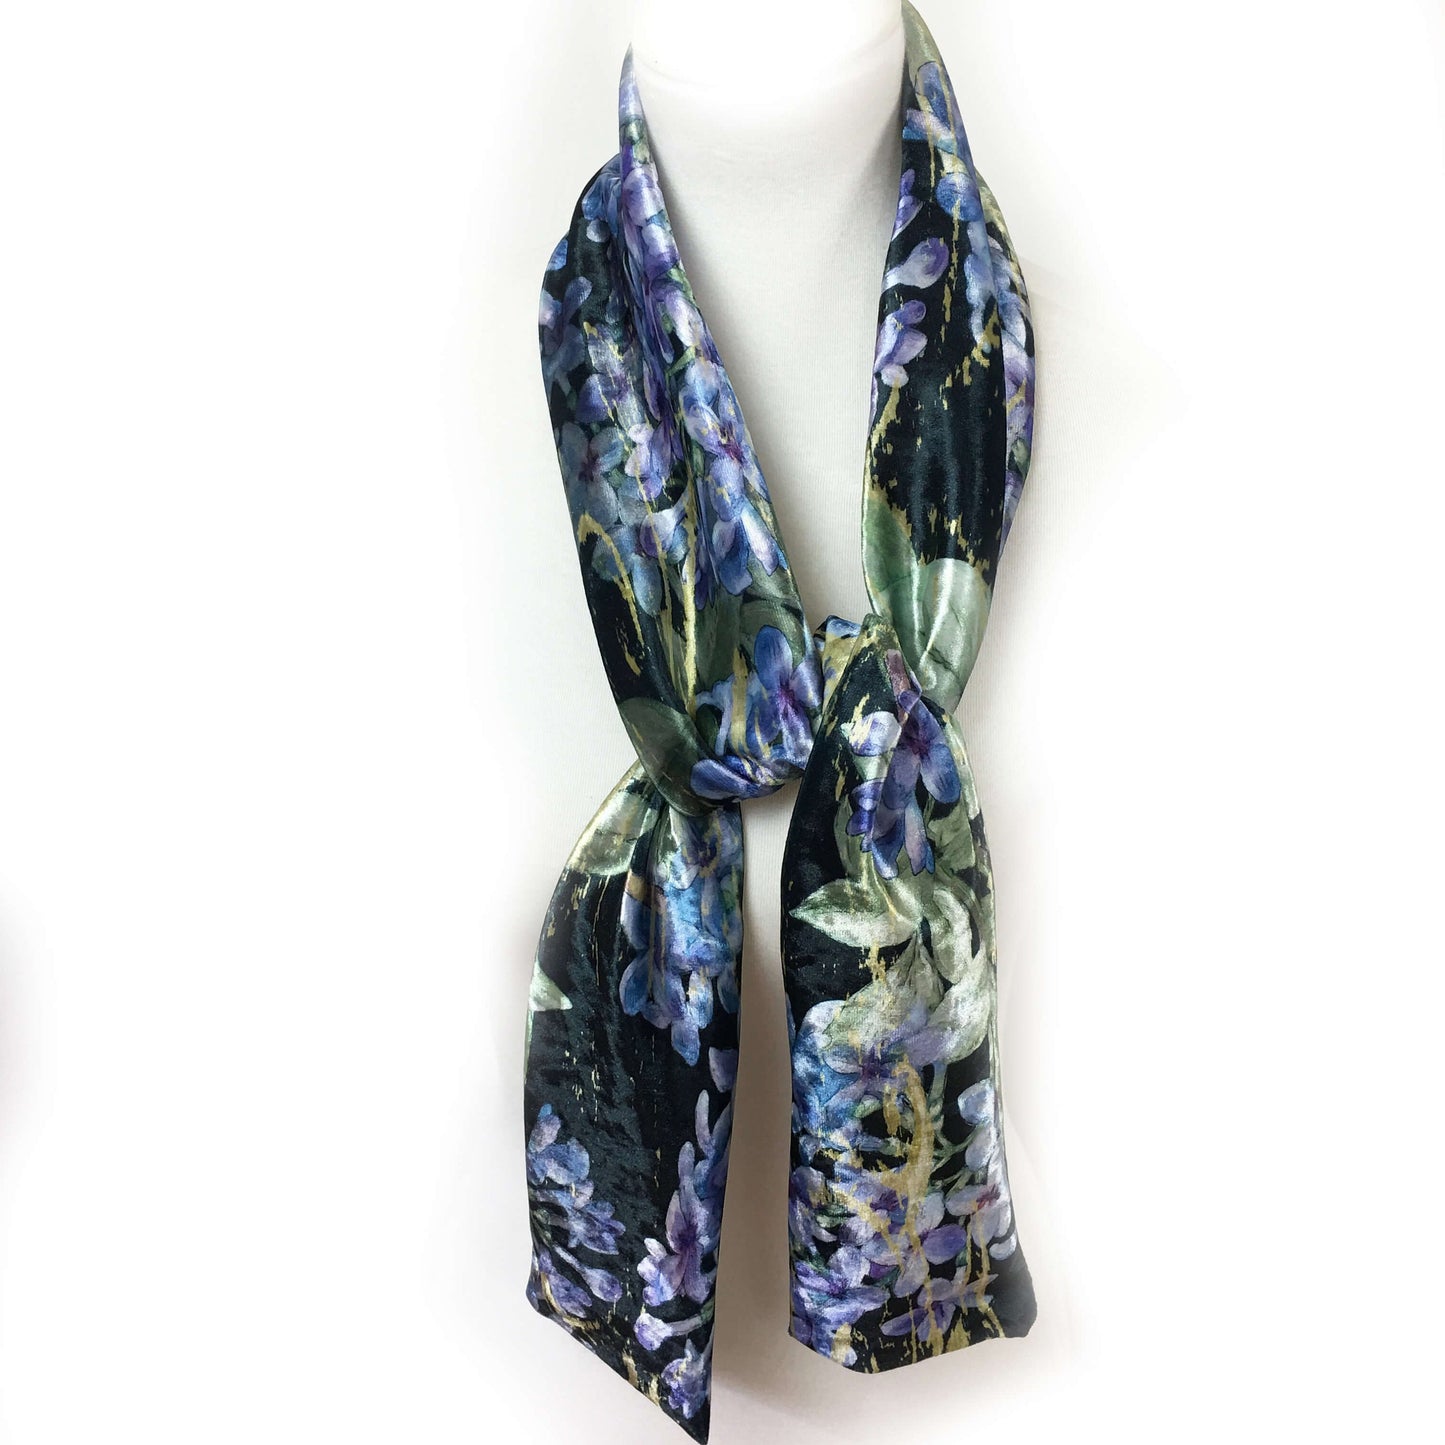 Lilacs Velour Scarf, Womans Scarf, All season, Luminous Scarf, hand painted scarf, artist scarf, Wear all day or evening